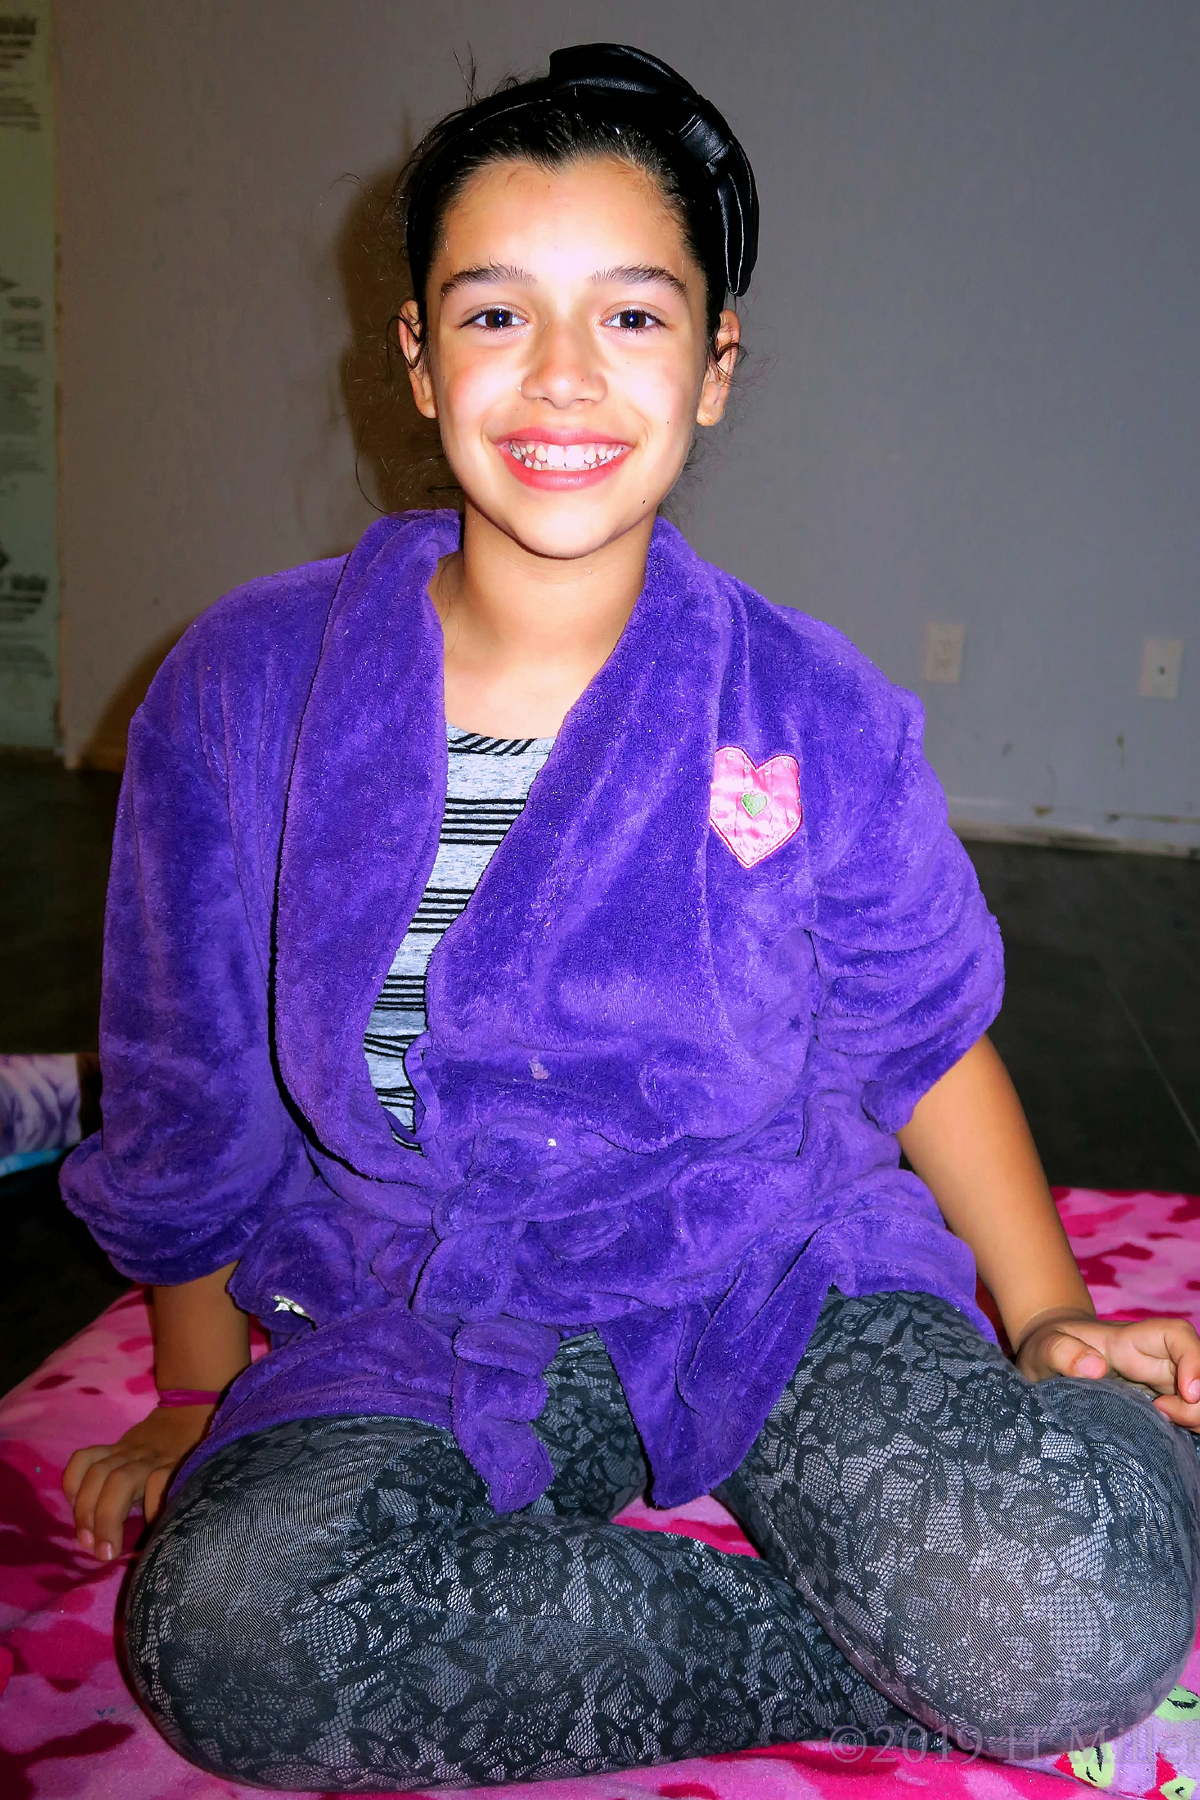 Beaming In Brilliance! Kids Spa Party Guest Poses After Kids Facials! 